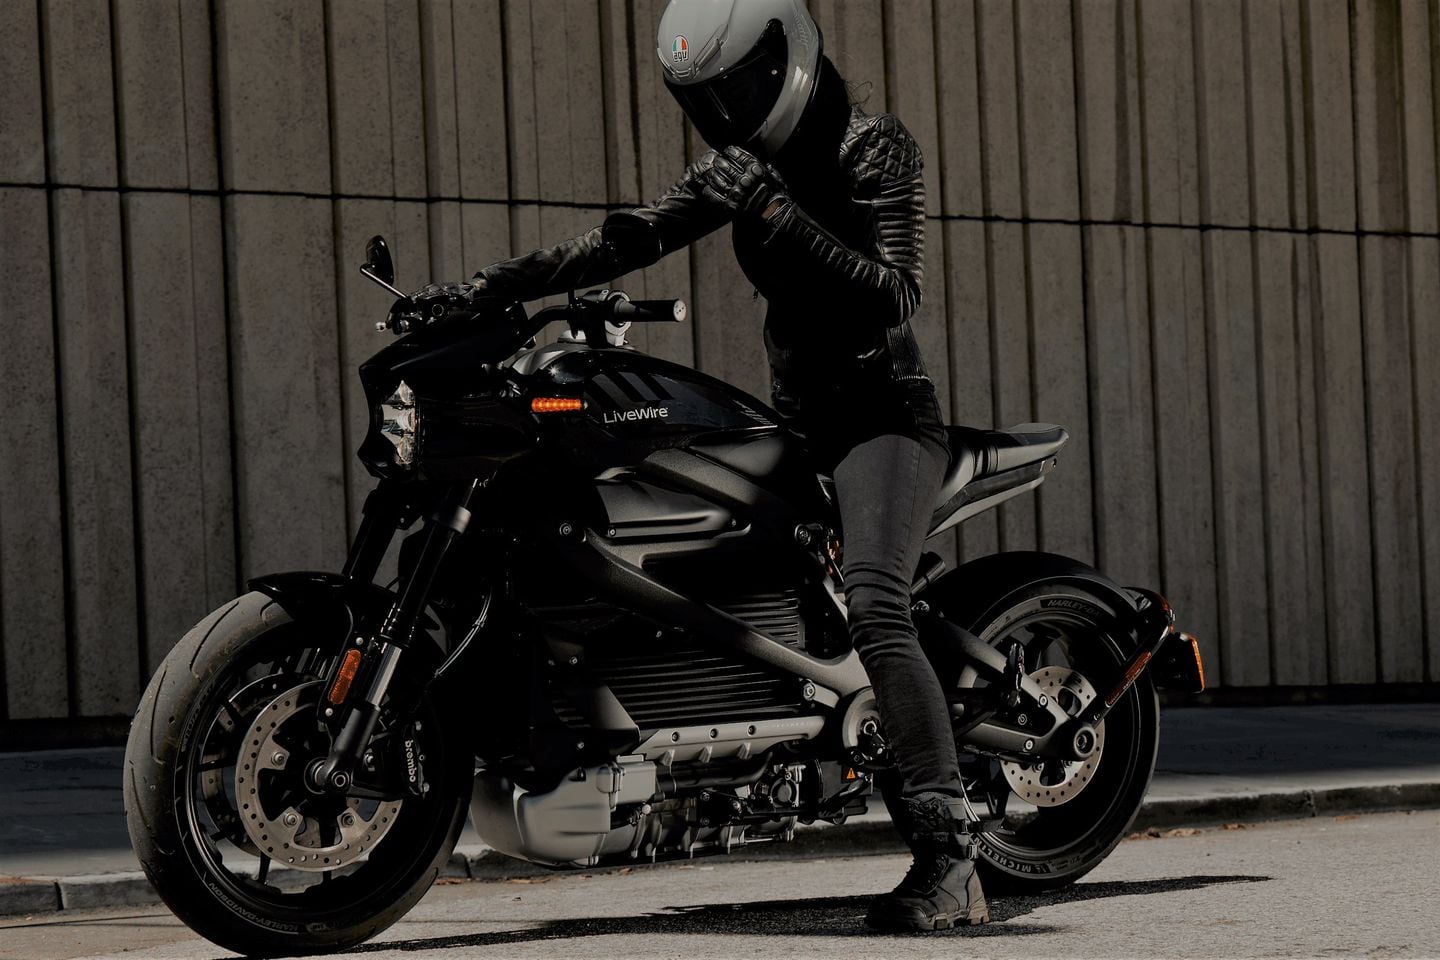 Harley Confirms Next LiveWire Electric Motorcycle